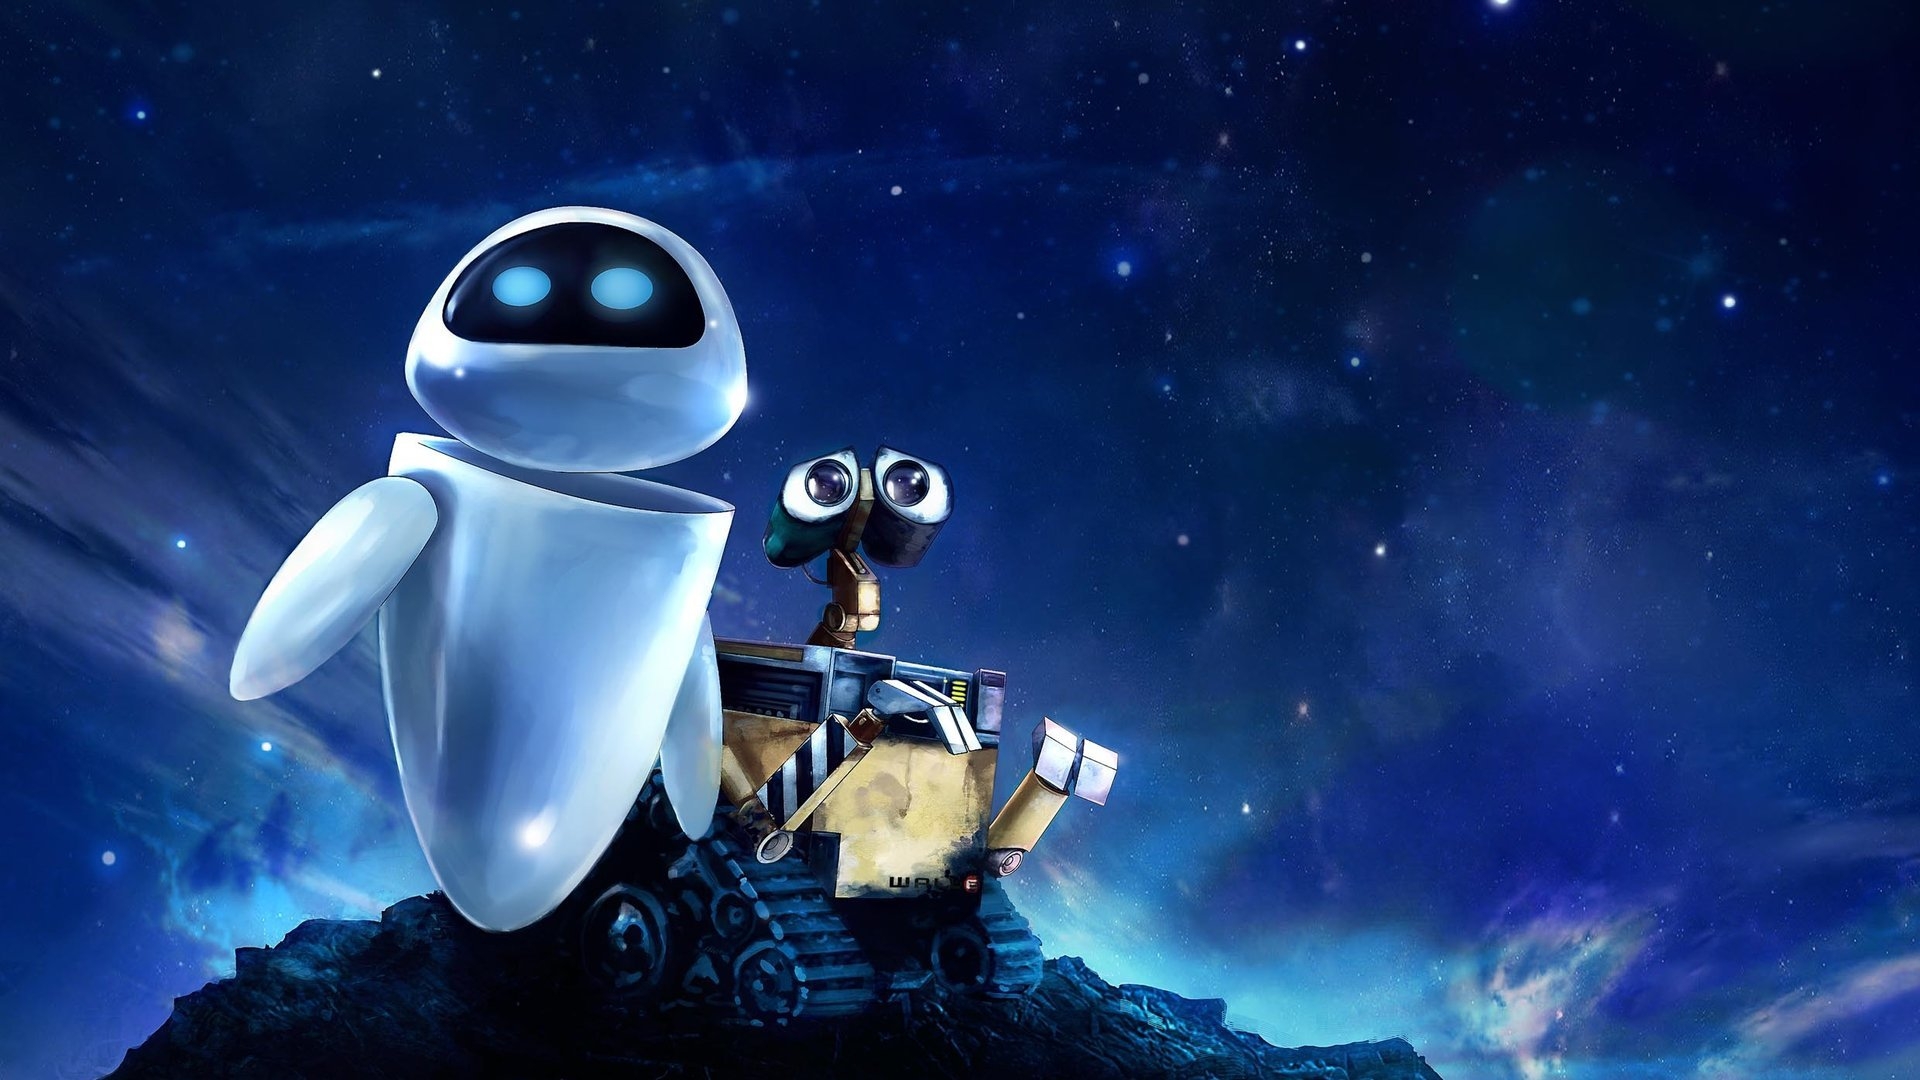 Walle Movie for 1920 x 1080 HDTV 1080p resolution